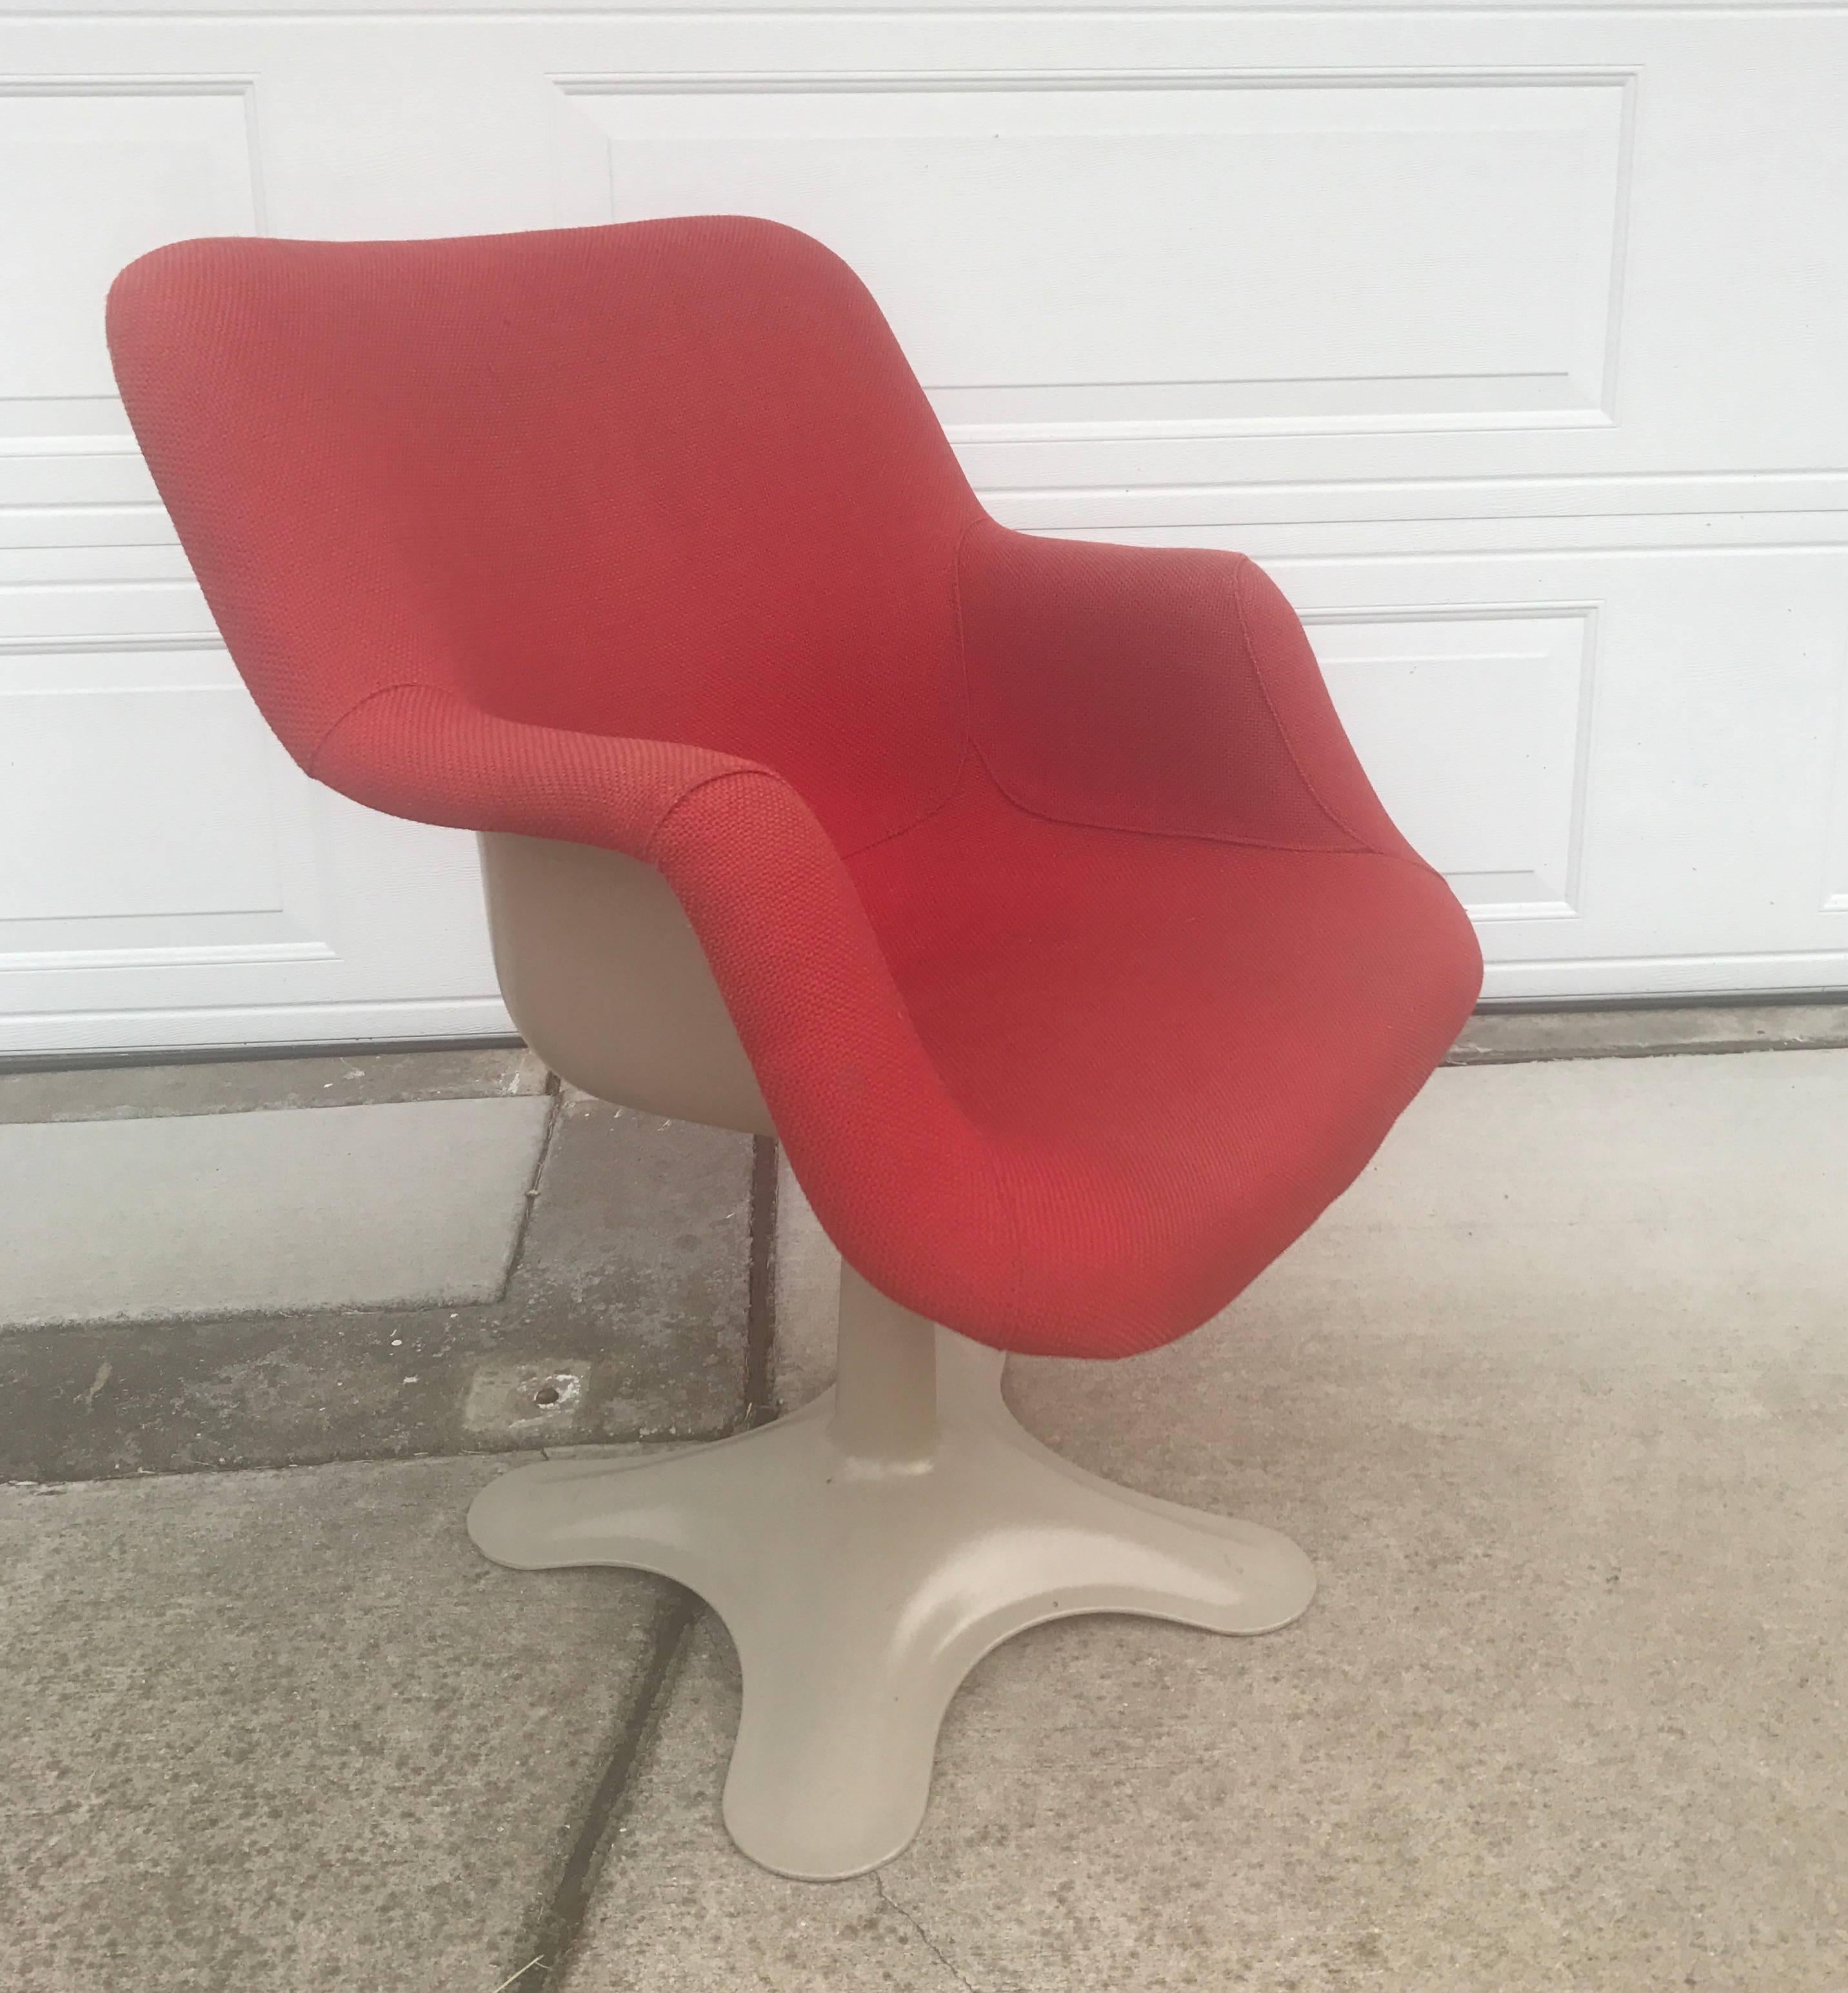 Yrjö Kukkapuro molded fiberglass swivel armchair in organic shape with red woven fabric. Fabric shows some moderate fading and age. Fabric is presentable but you would want to reupholster for it to be pristine. No chips to fiberglass, minor scuffs.